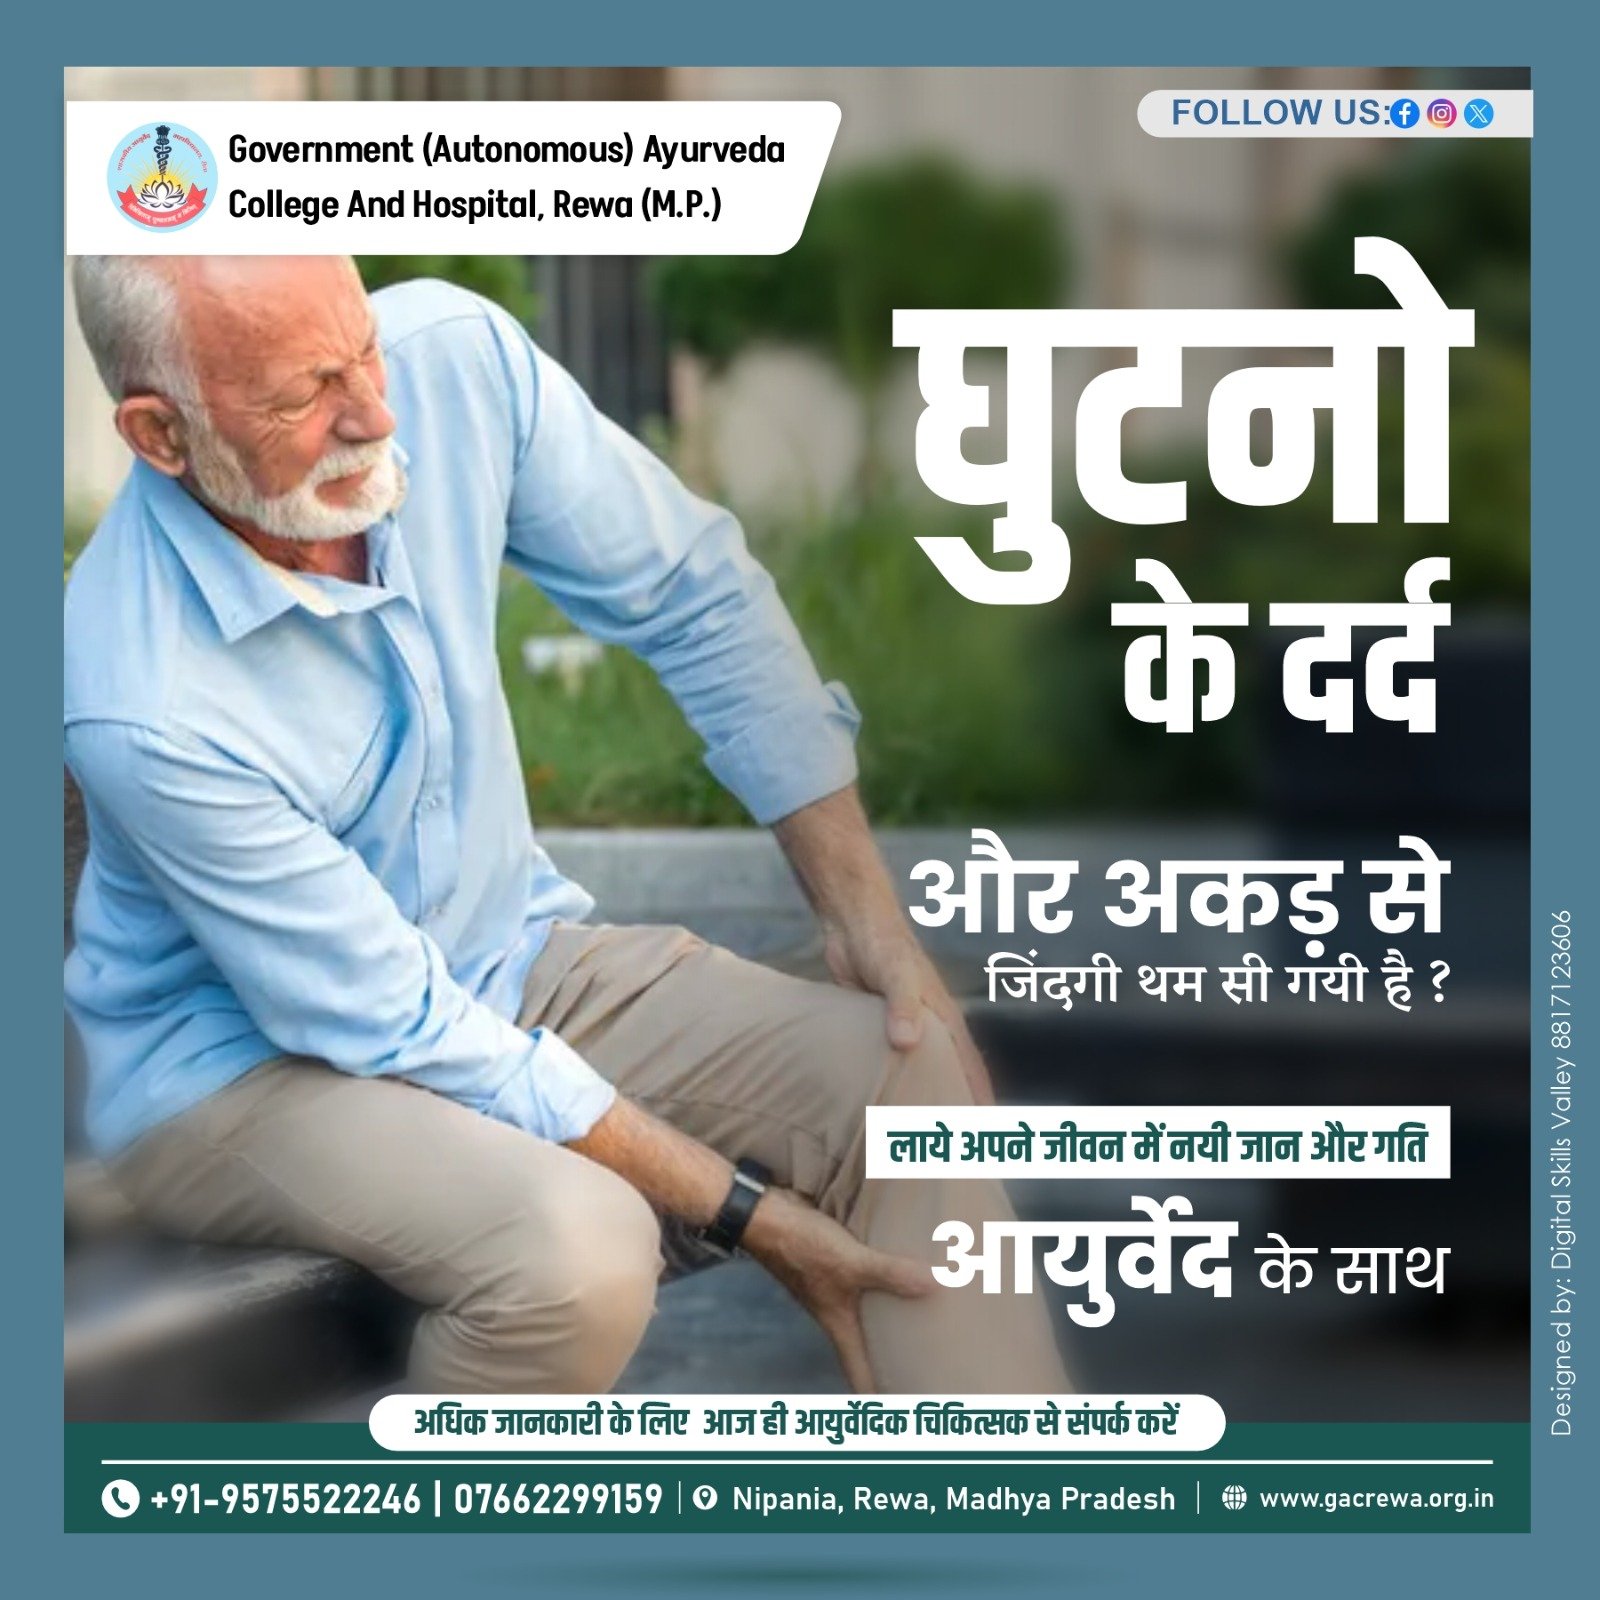 Get relief from knee pain & stiffness: Start a new life with Ayurveda